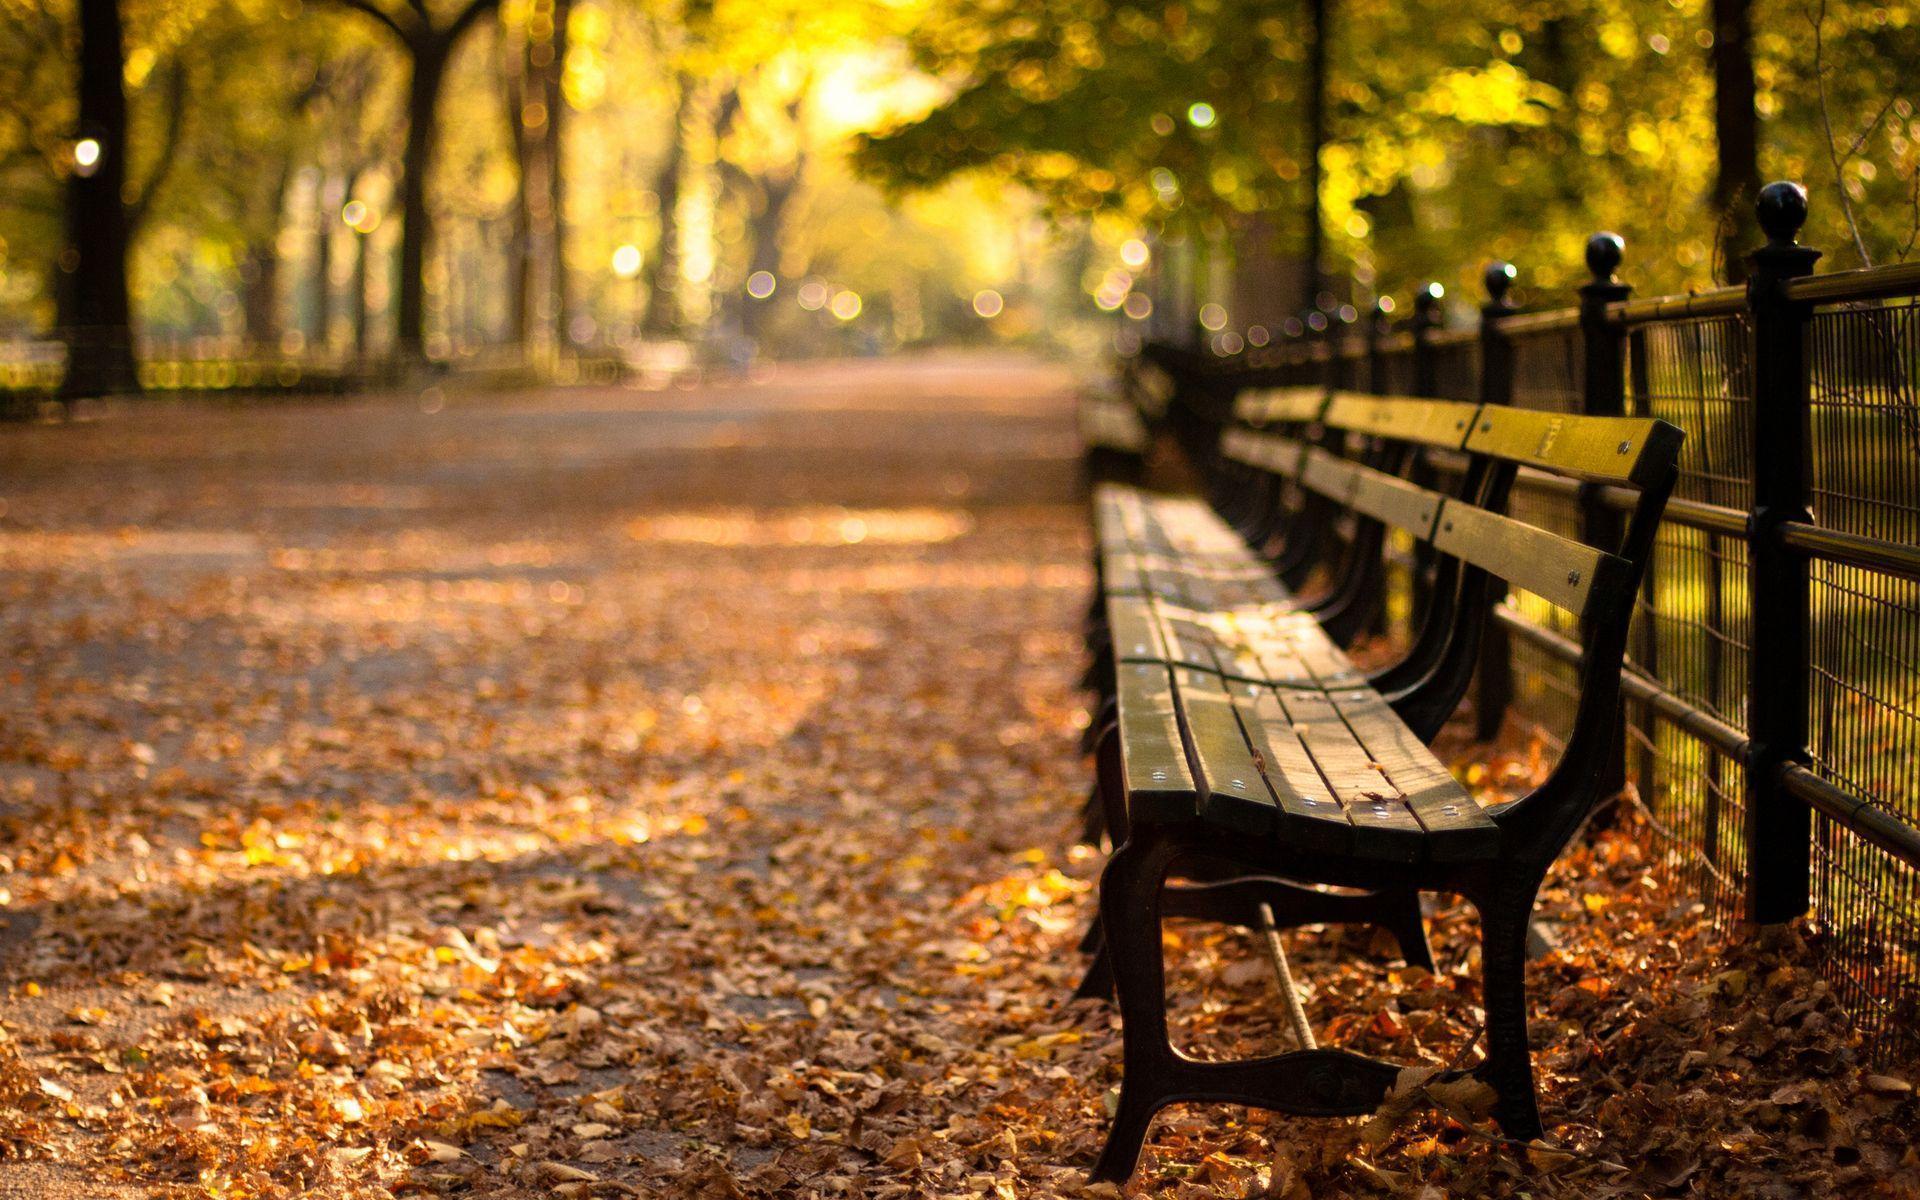 Bench Wallpaper, HQ Definition Bench Wallpaper for Free, Pics